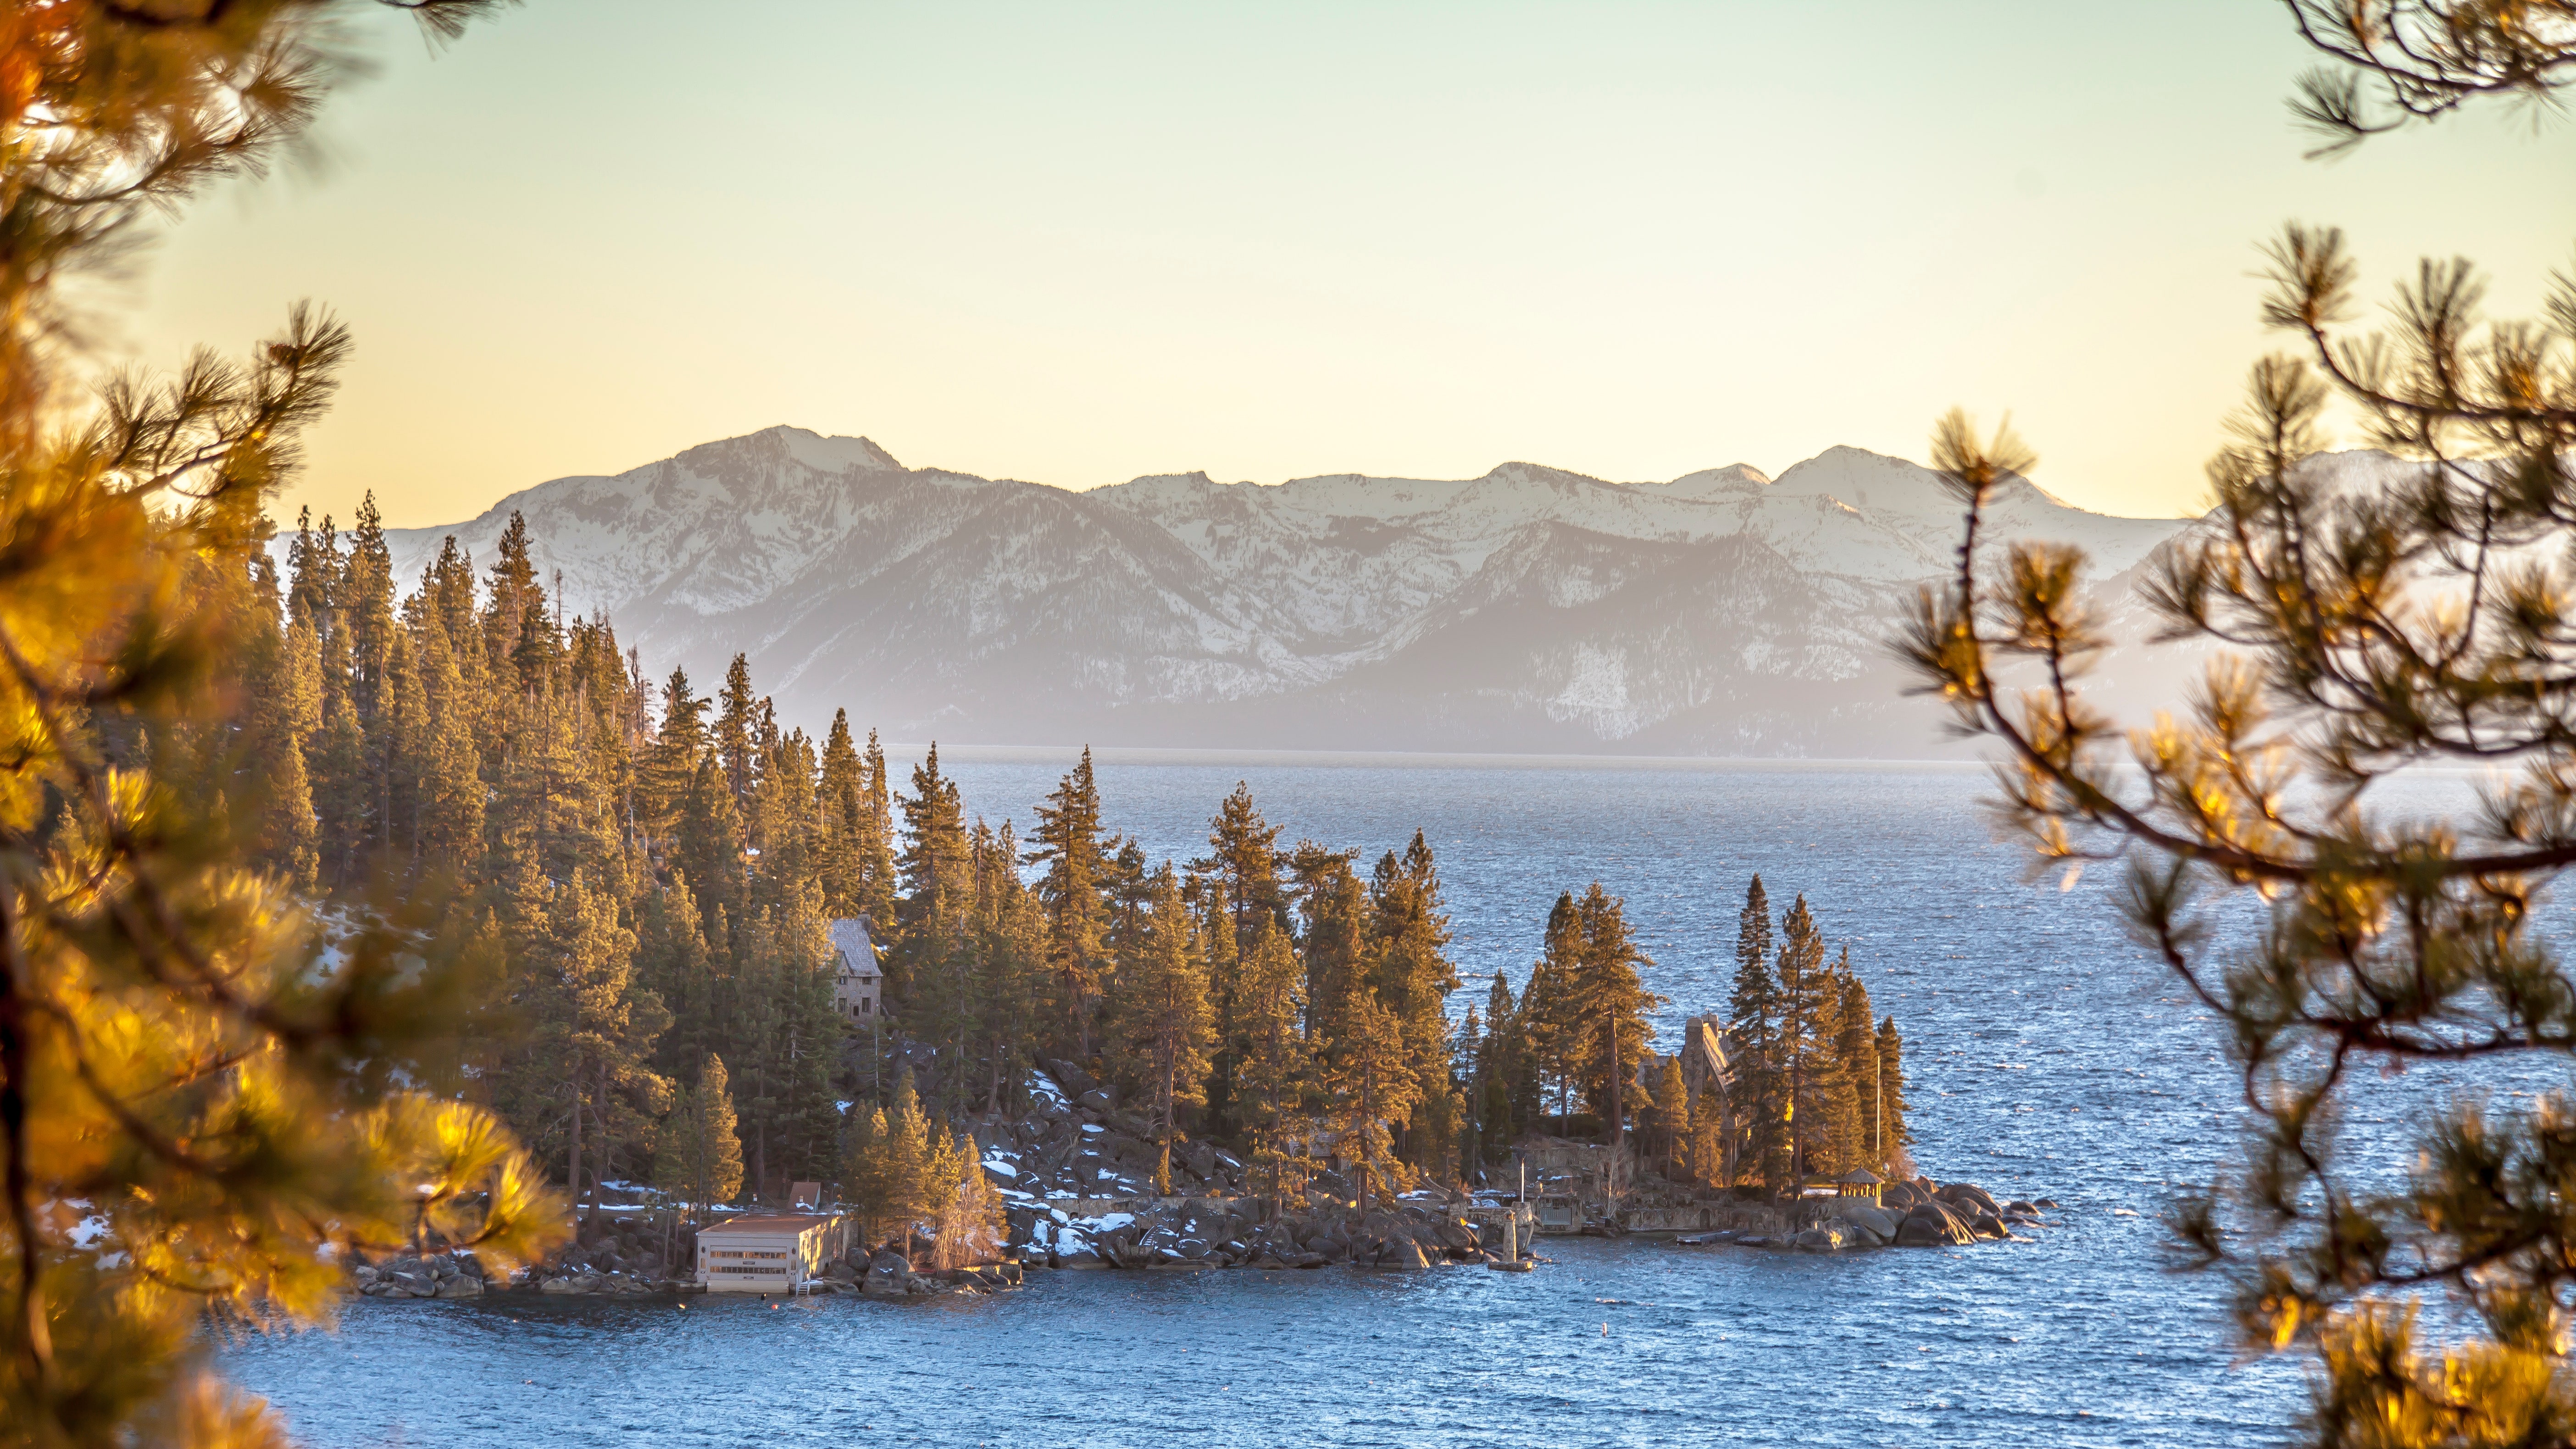 Where to Eat, Stay, and Play Around Lake Tahoe. Condé Nast Traveler